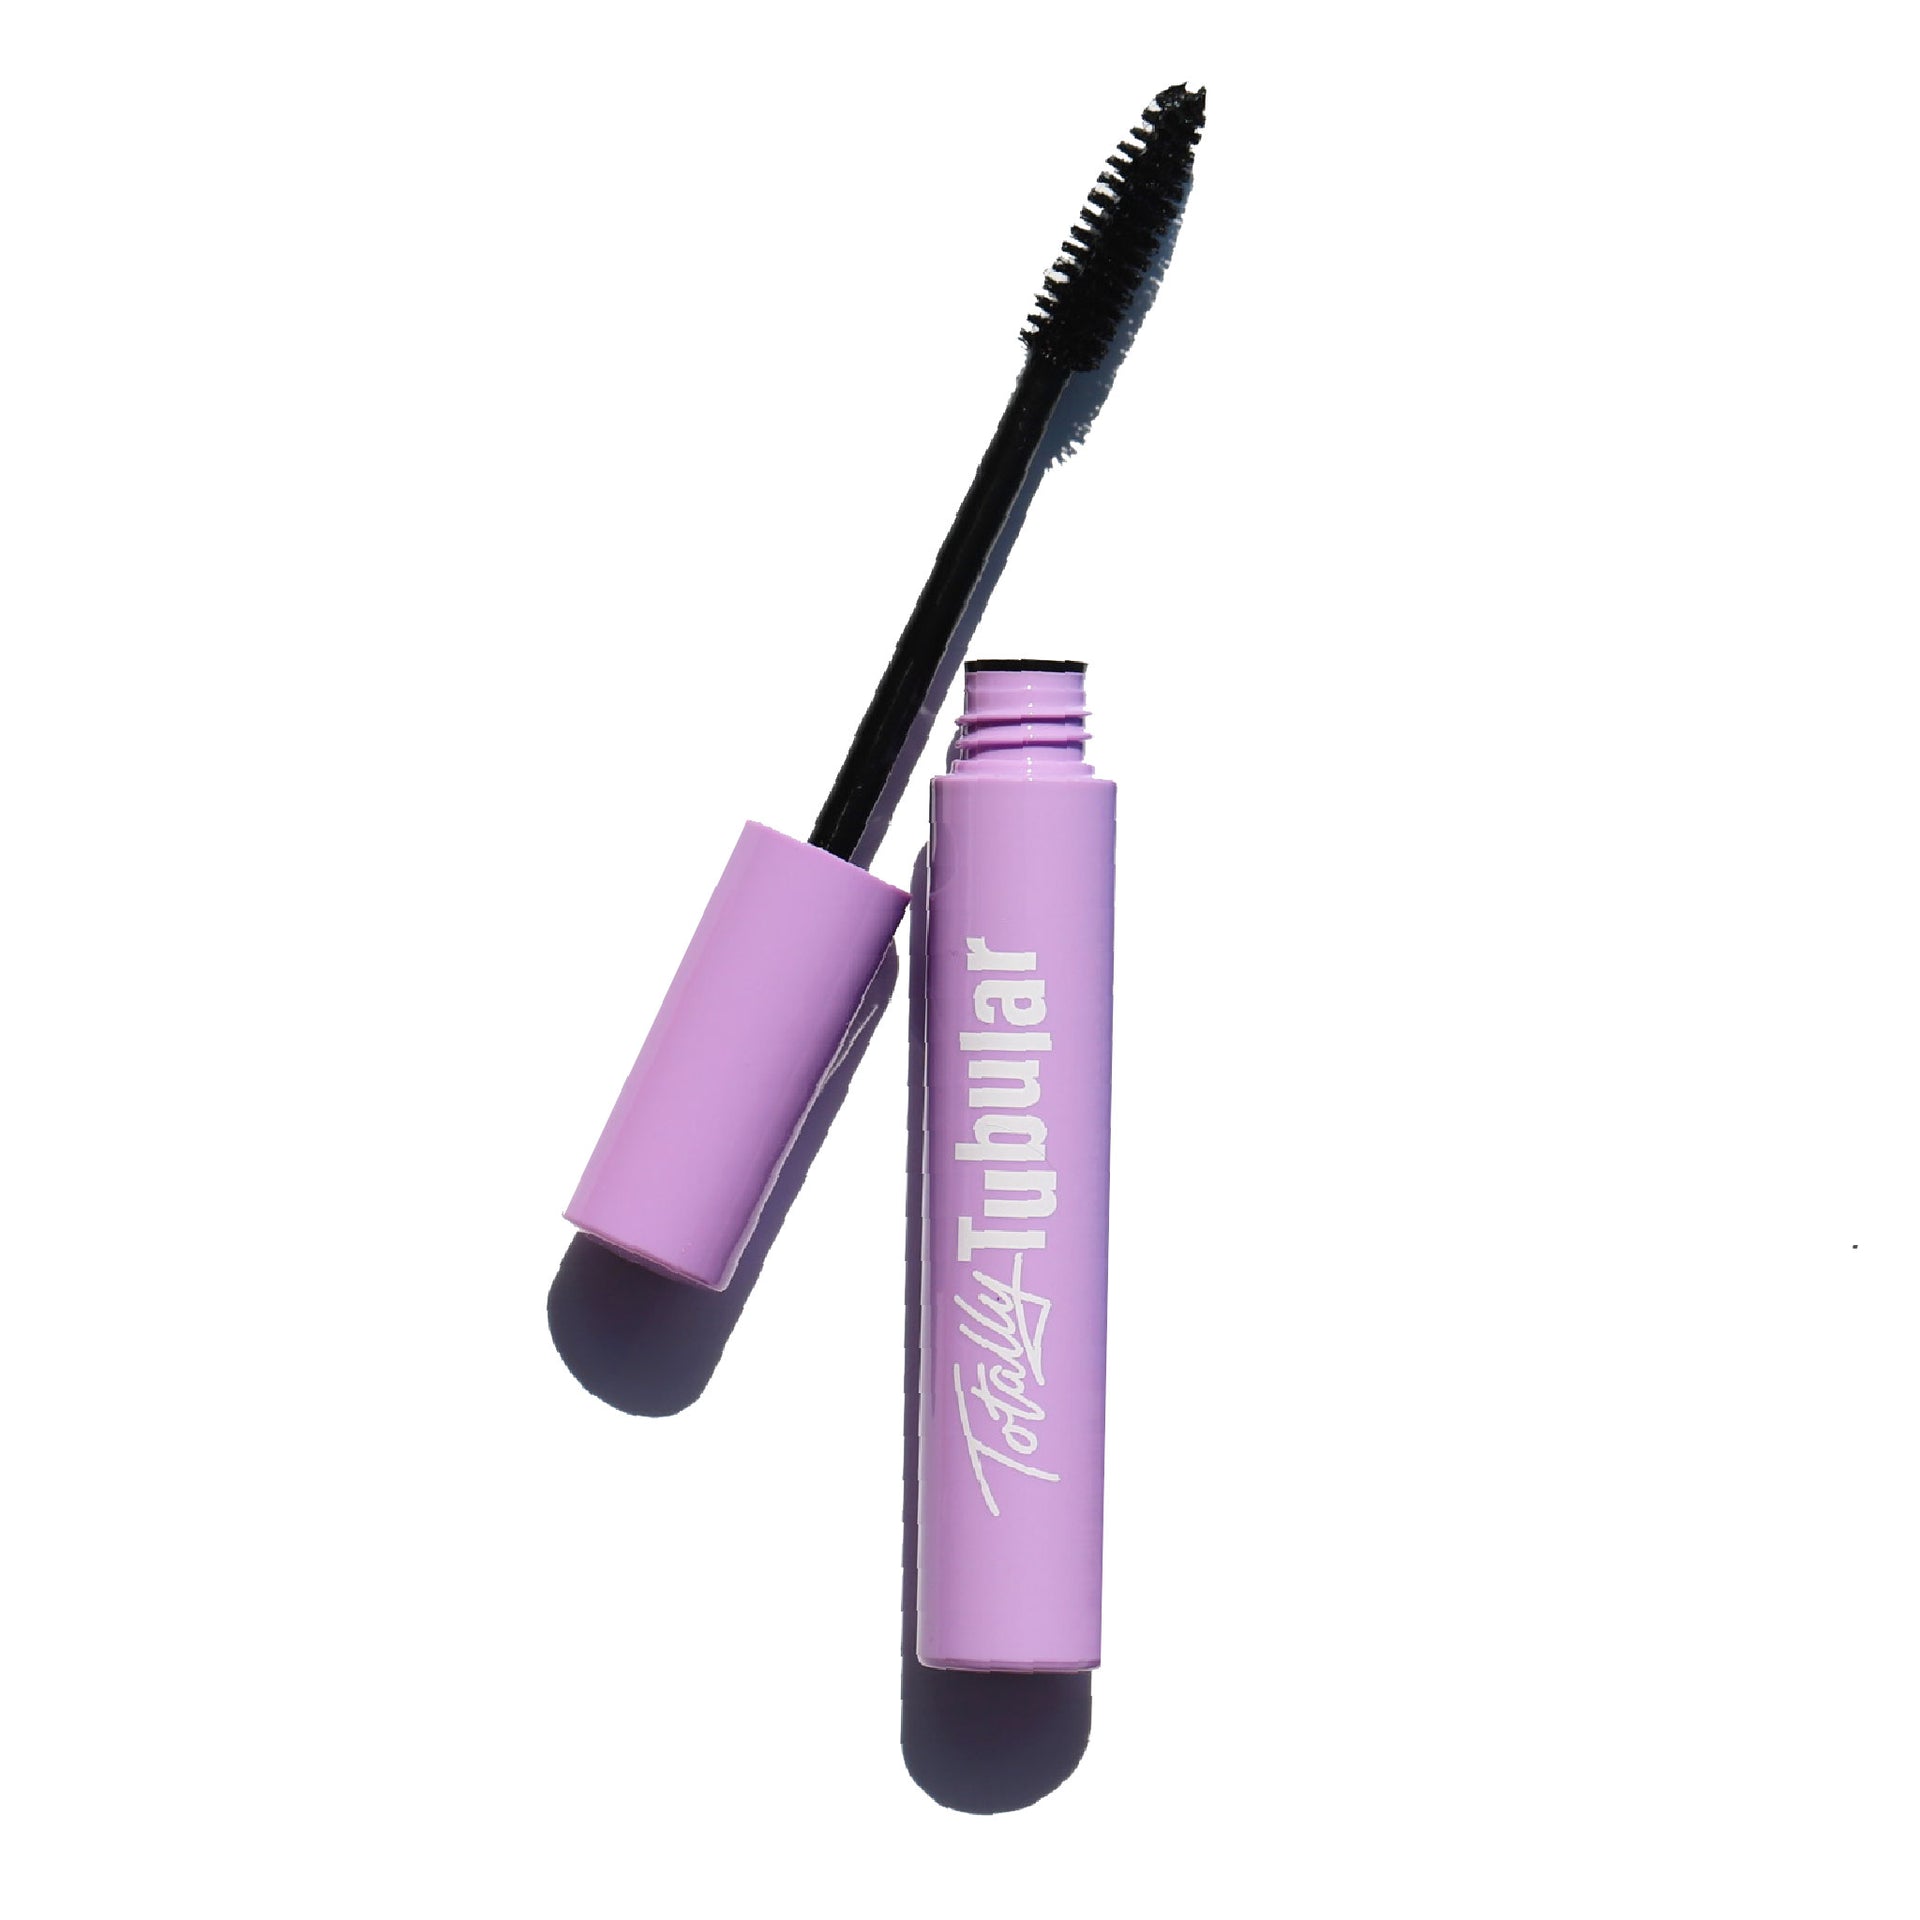 Totally Tubular Mascara: The Realest, Great Lengths Duo- Half Caked